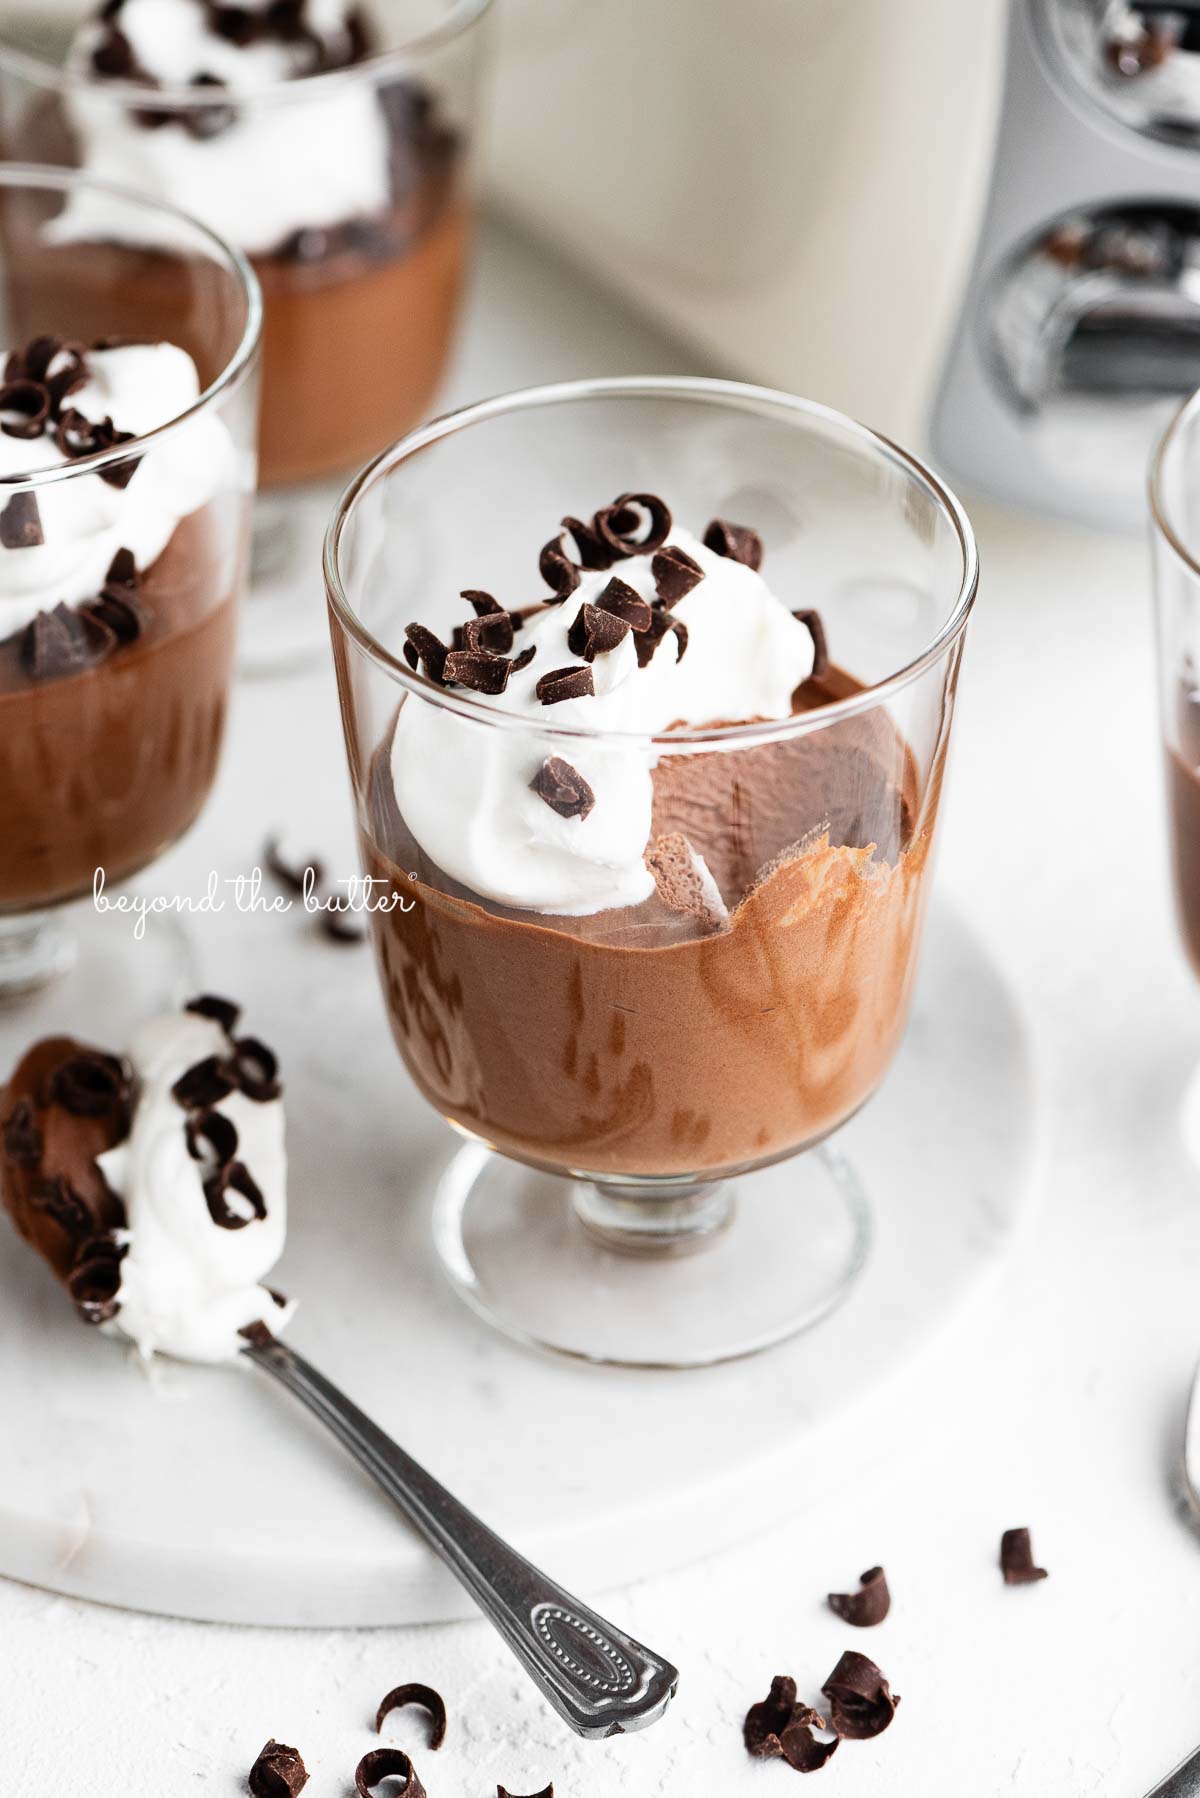 Parfait goblets filled with chocolate mousse, whipped cream, and chocolate curls with a spoonful laying next to one on a white marble slab and white textured background.